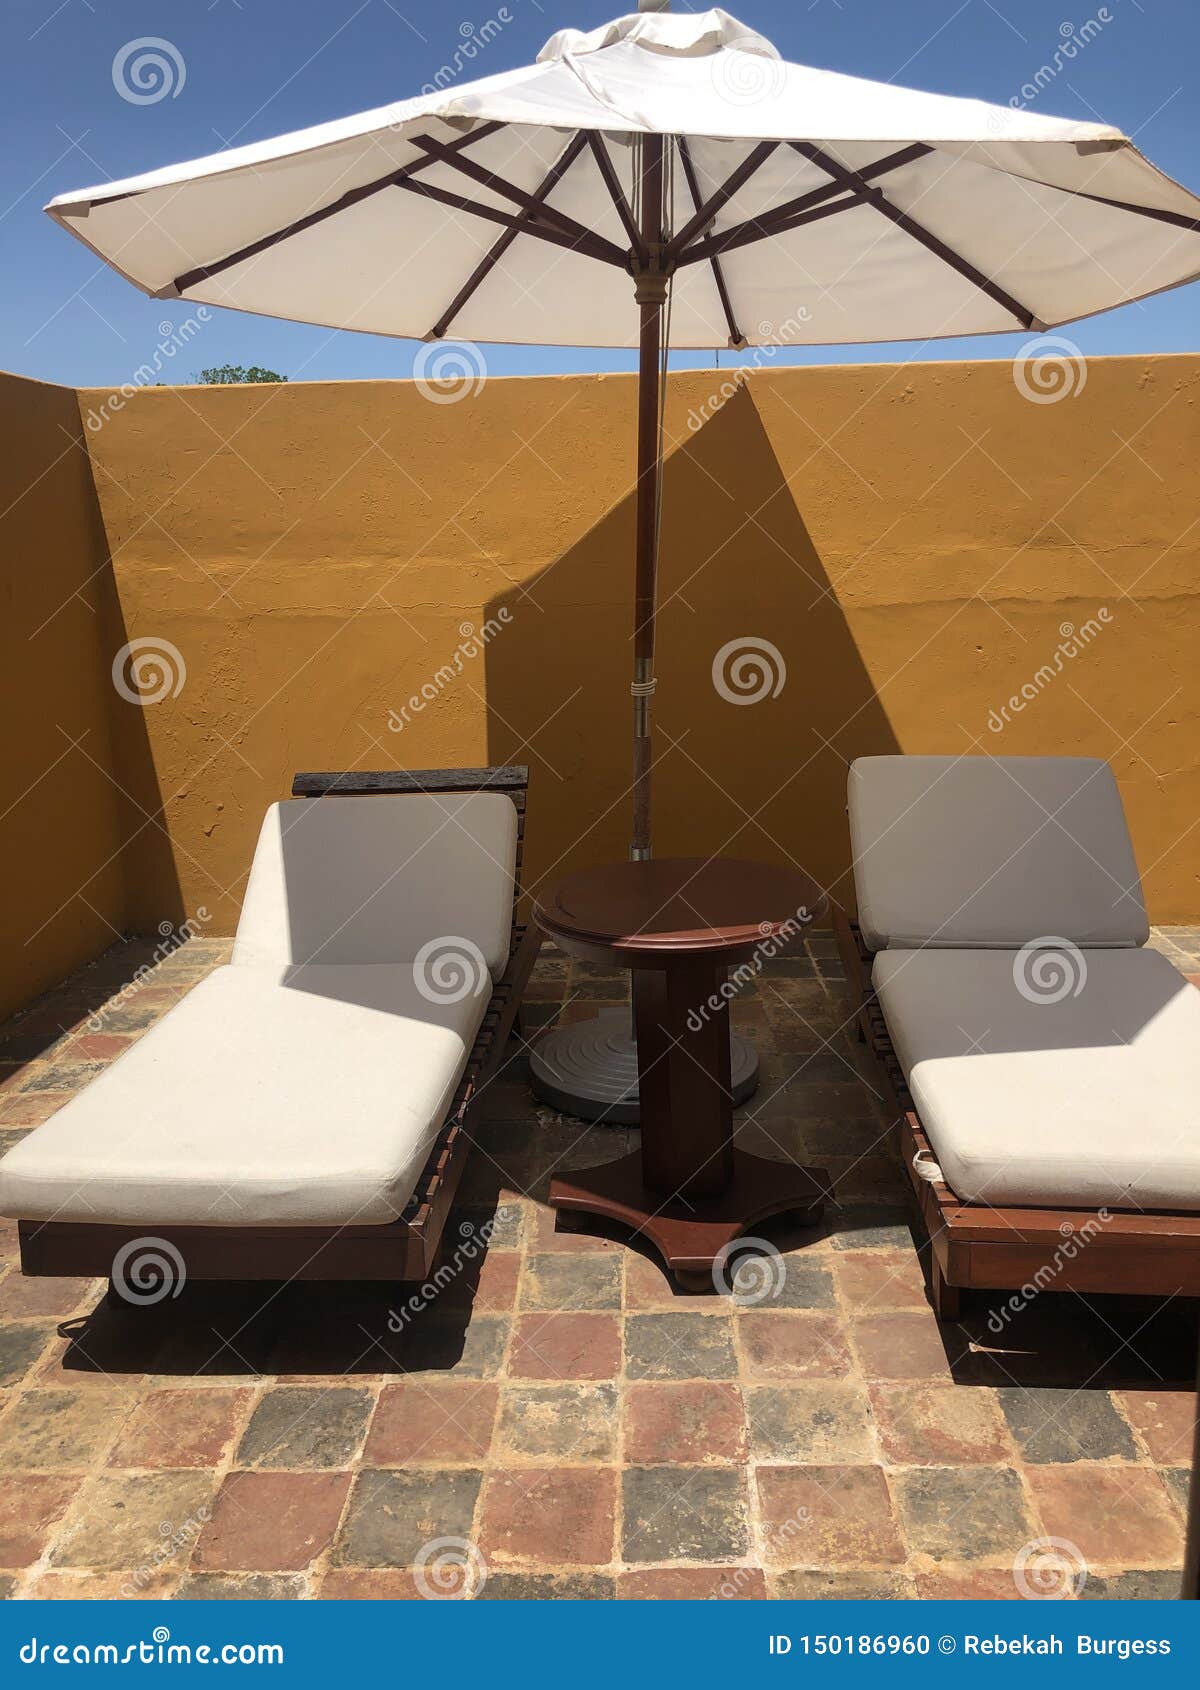 Lounge Chairs And Shade Umbrella Stock Photo Image Of Design